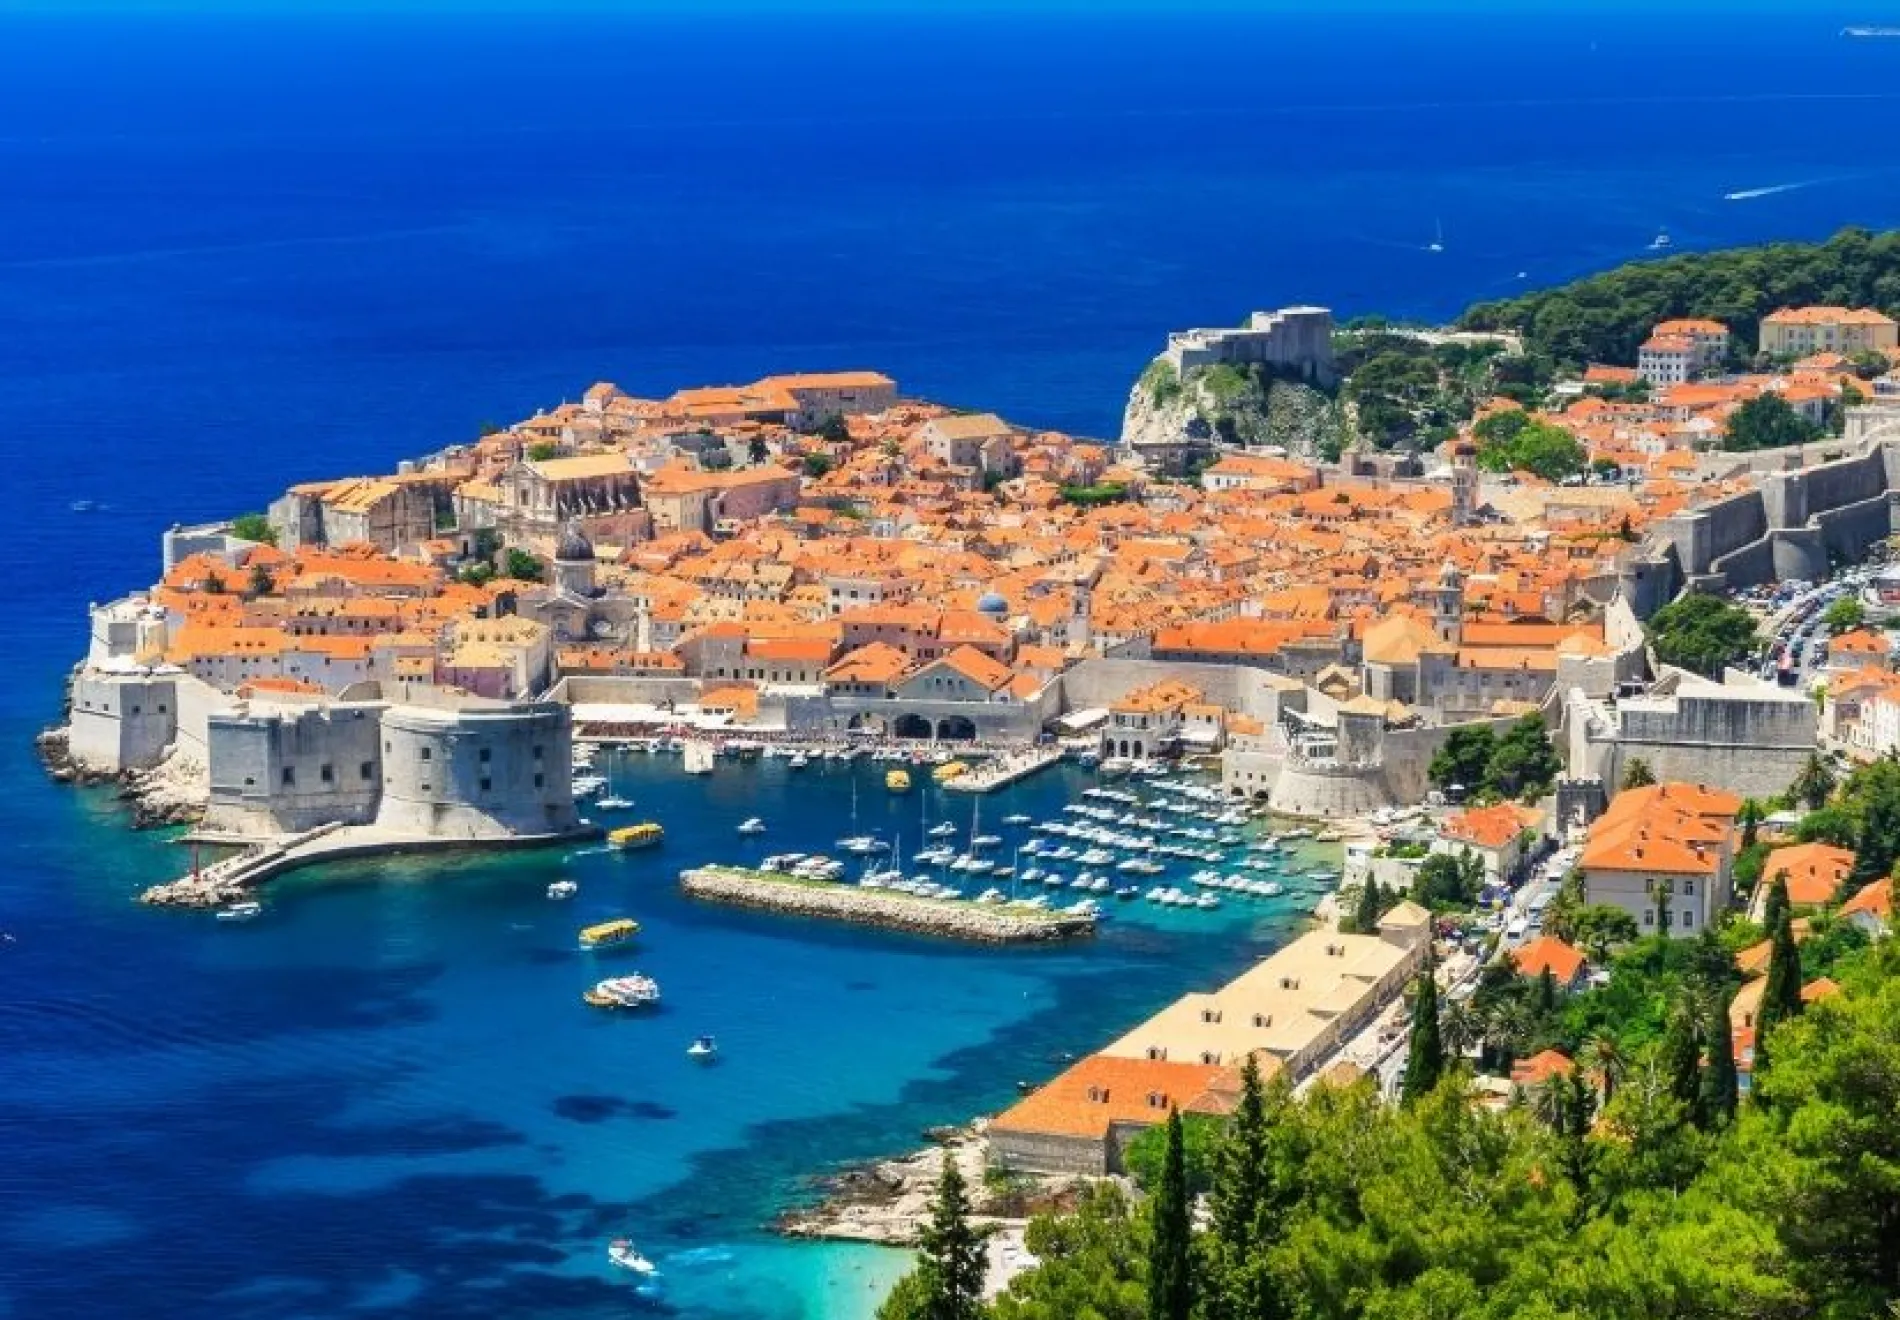 A panoramic view of the walled city Dubrovnik Croatia 824-1024